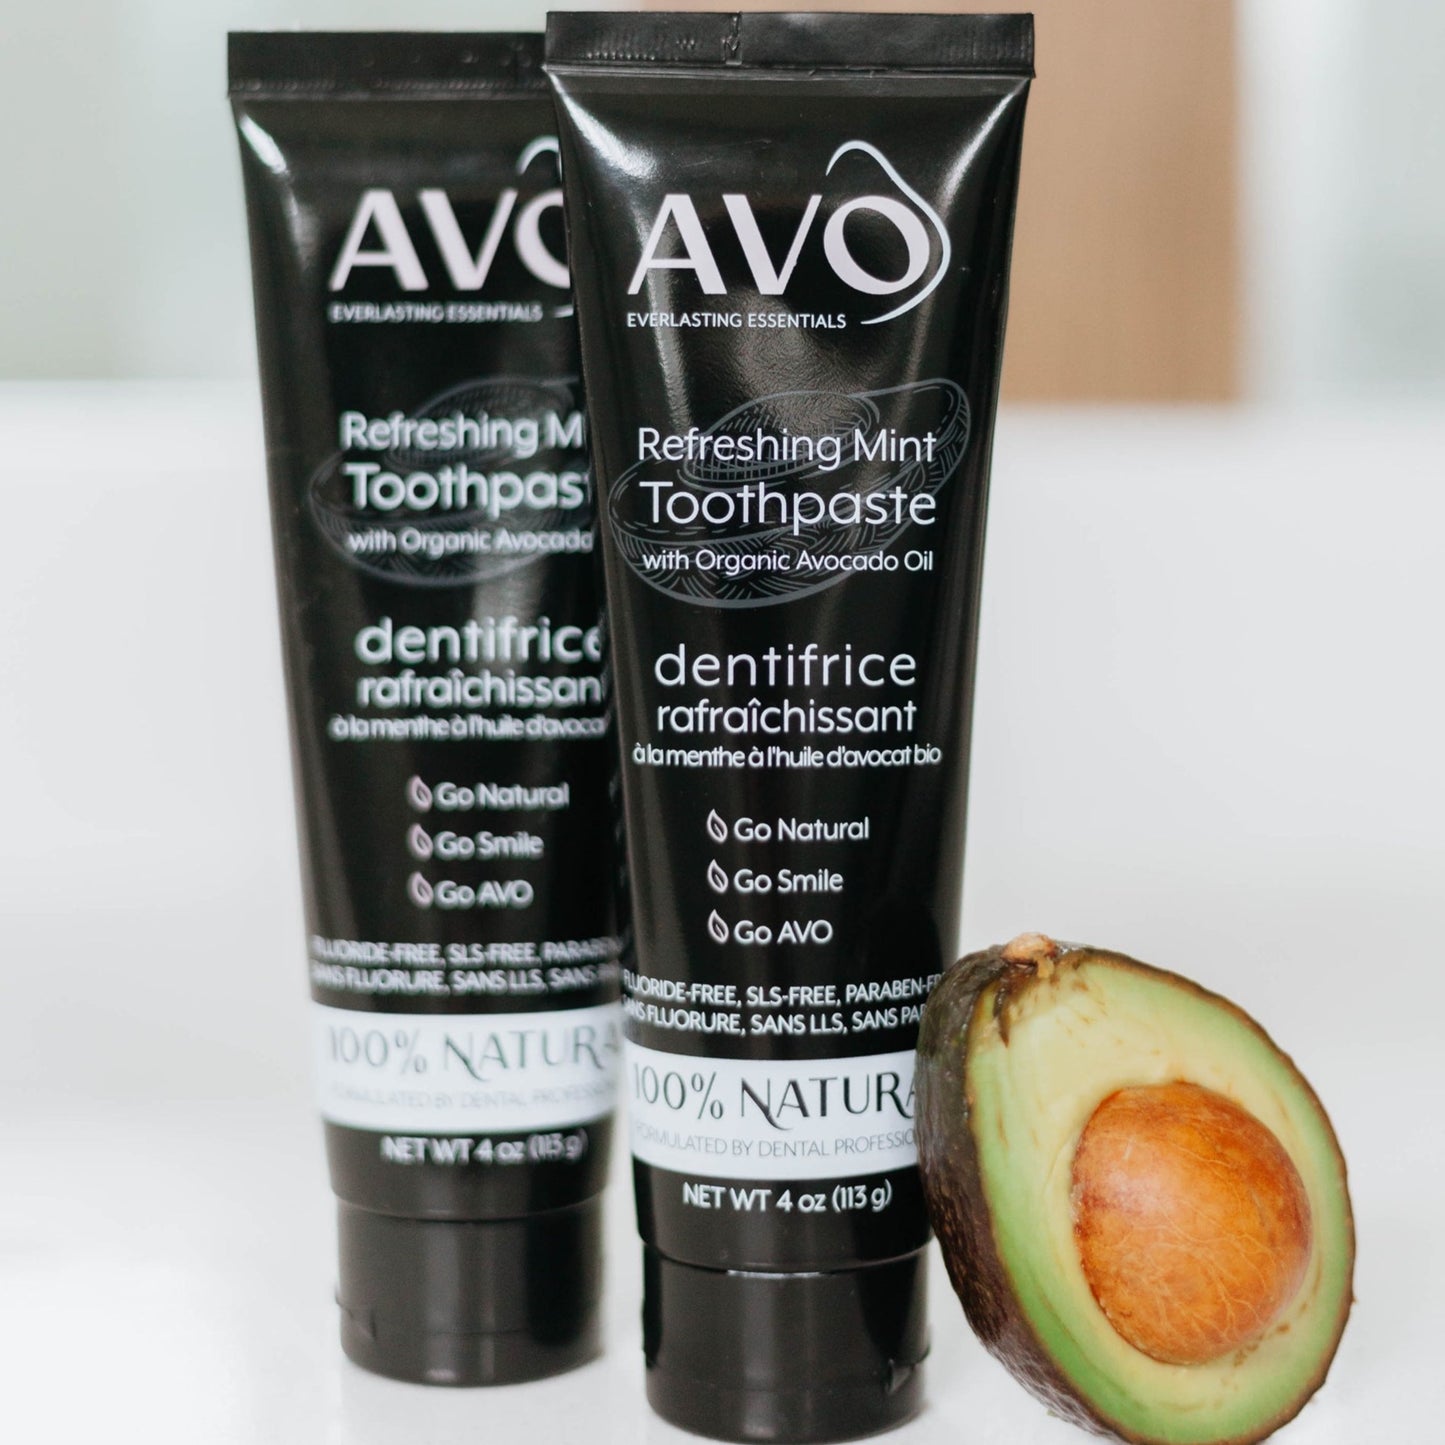 Refreshing mint toothpaste, fluoride free toothpaste, facing foreword, made with avocado oil